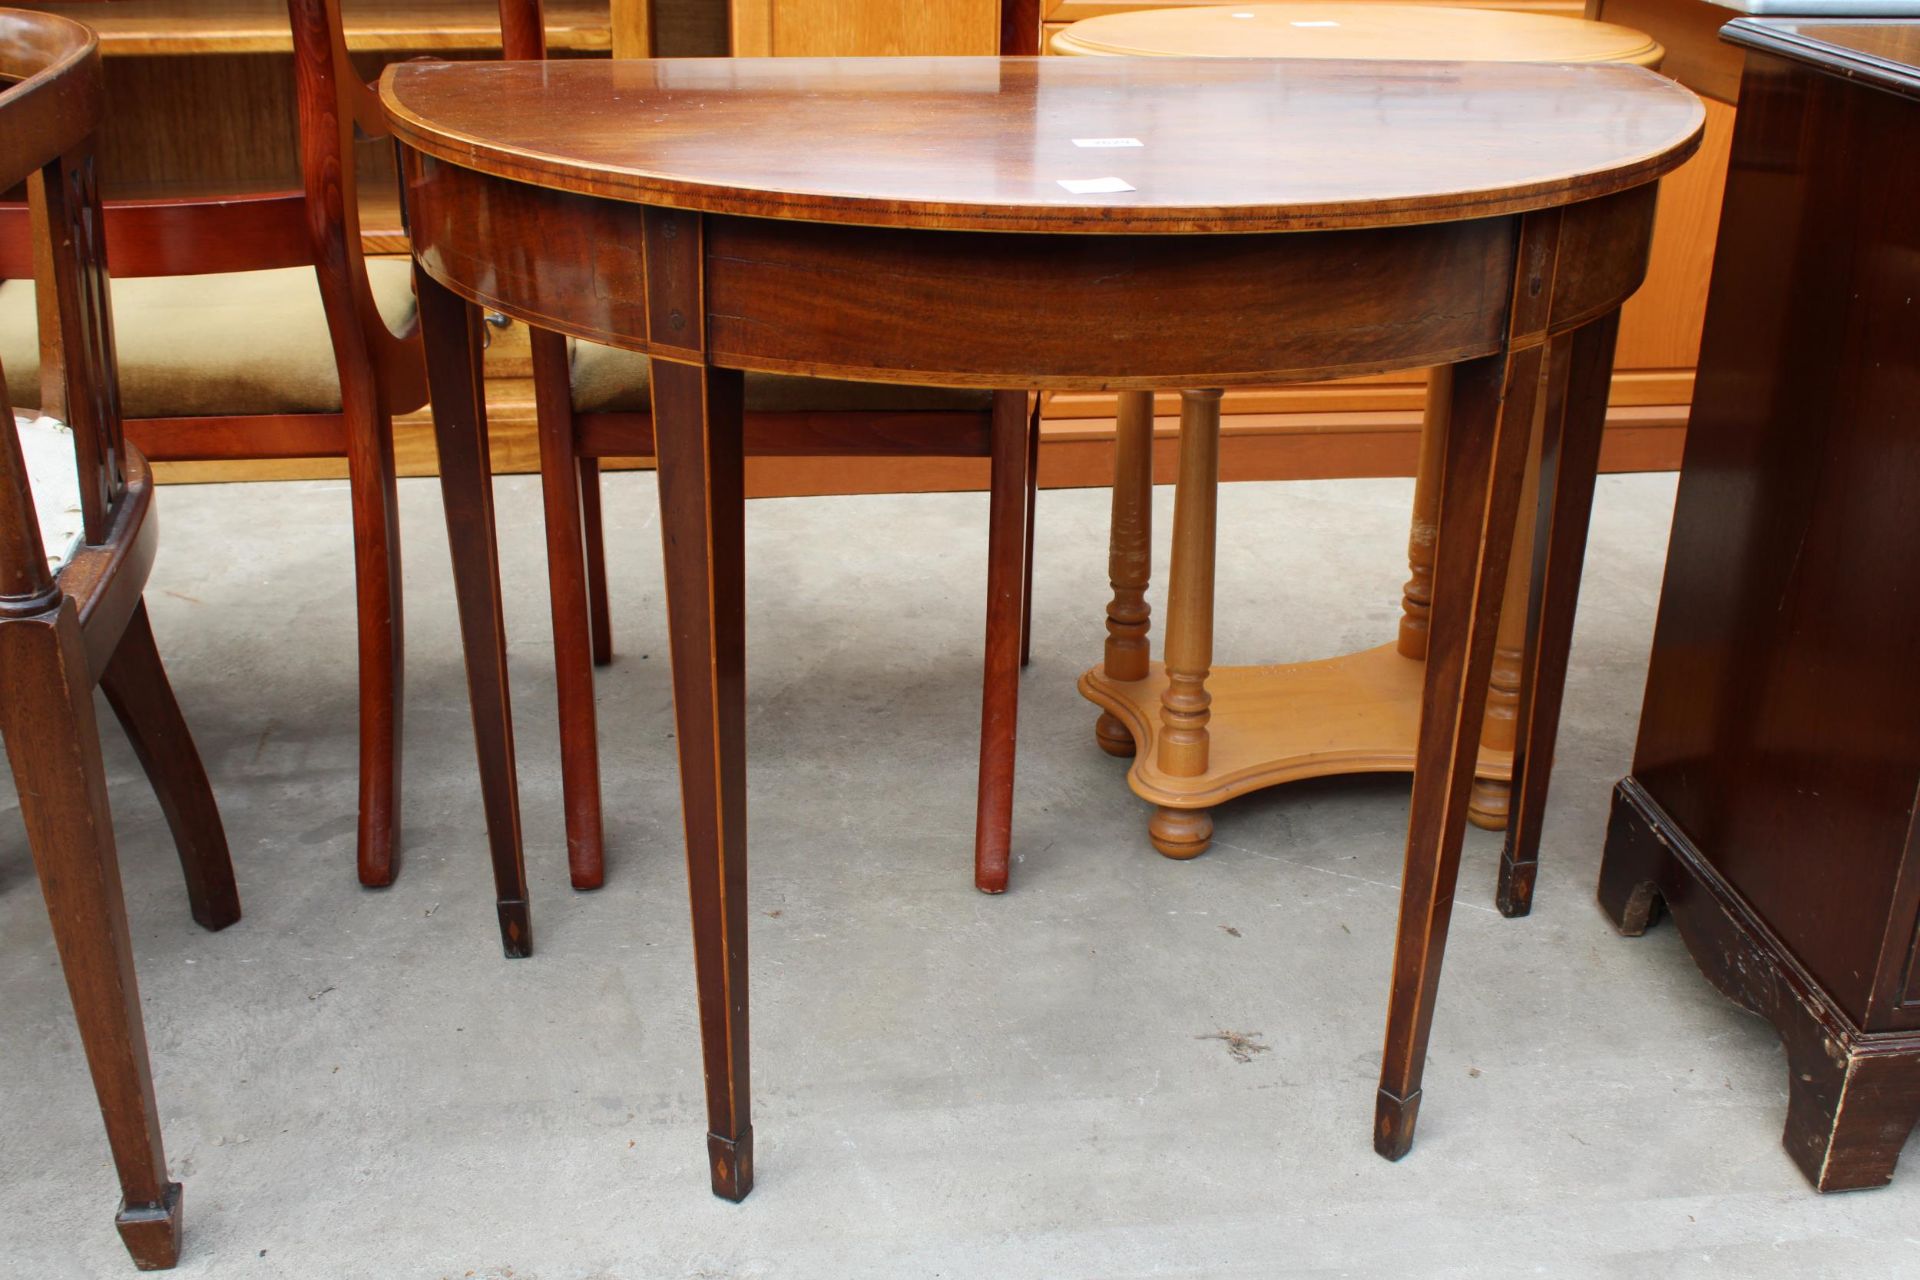 A 19TH CENTURY MAHOGANY AND CROSSBANDED DEMI-LUNE TABLE ON TAPERING LEGS WITH SPADE FEET , 36" WIDE - Image 2 of 3